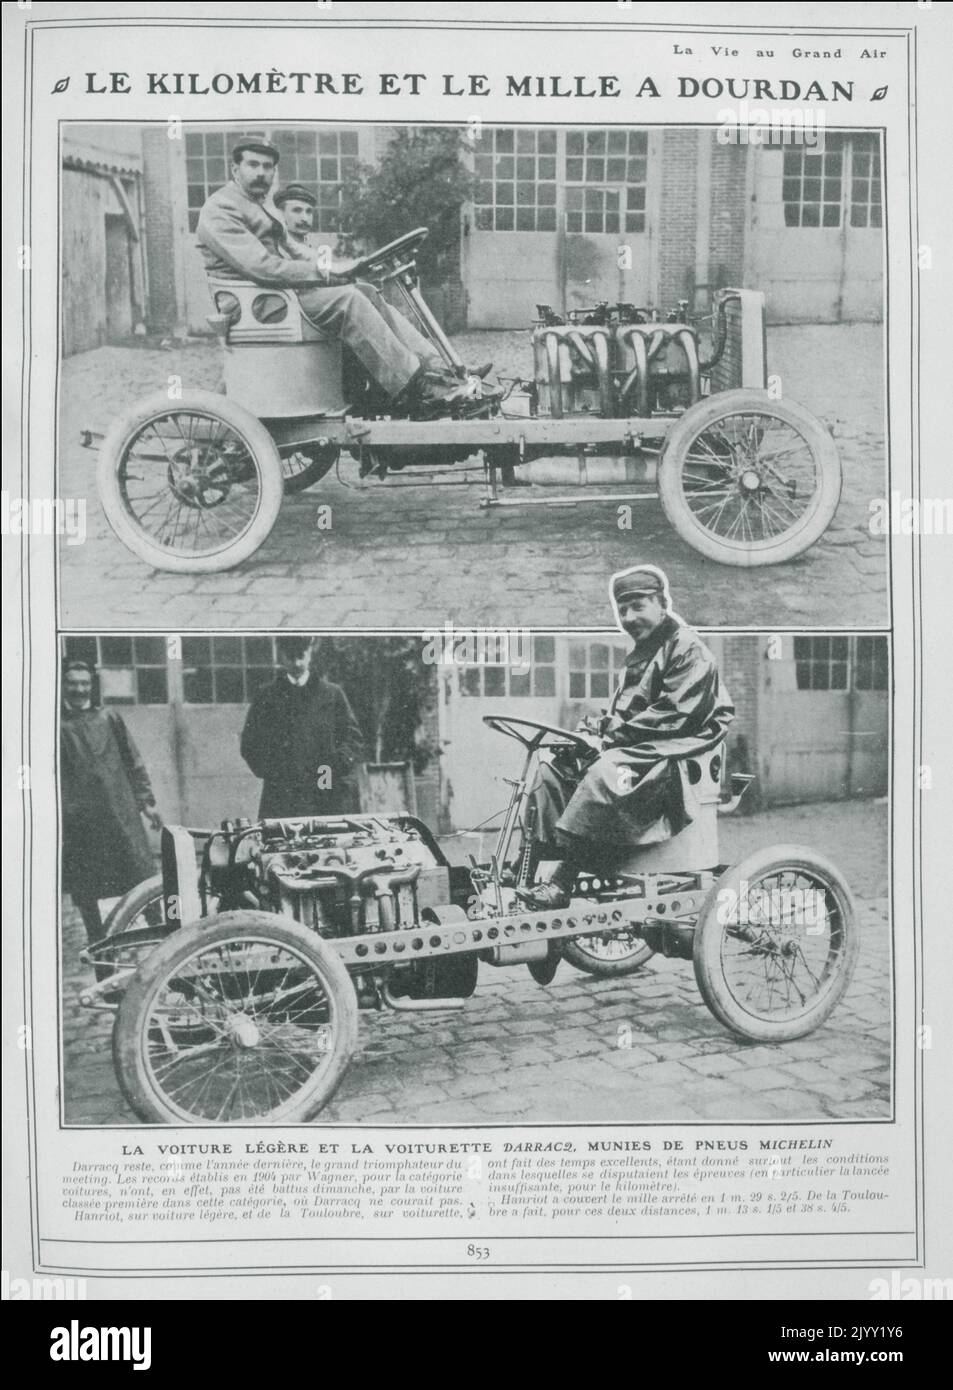 Photographs of French vintage car drivers in the Dourdan's kilometer and Mile races, 1905. These were international French sprint car competitions, held annually in Dourdan (southwest of Paris) in the early twentieth century, for two and four-wheel motorized vehicles Stock Photo